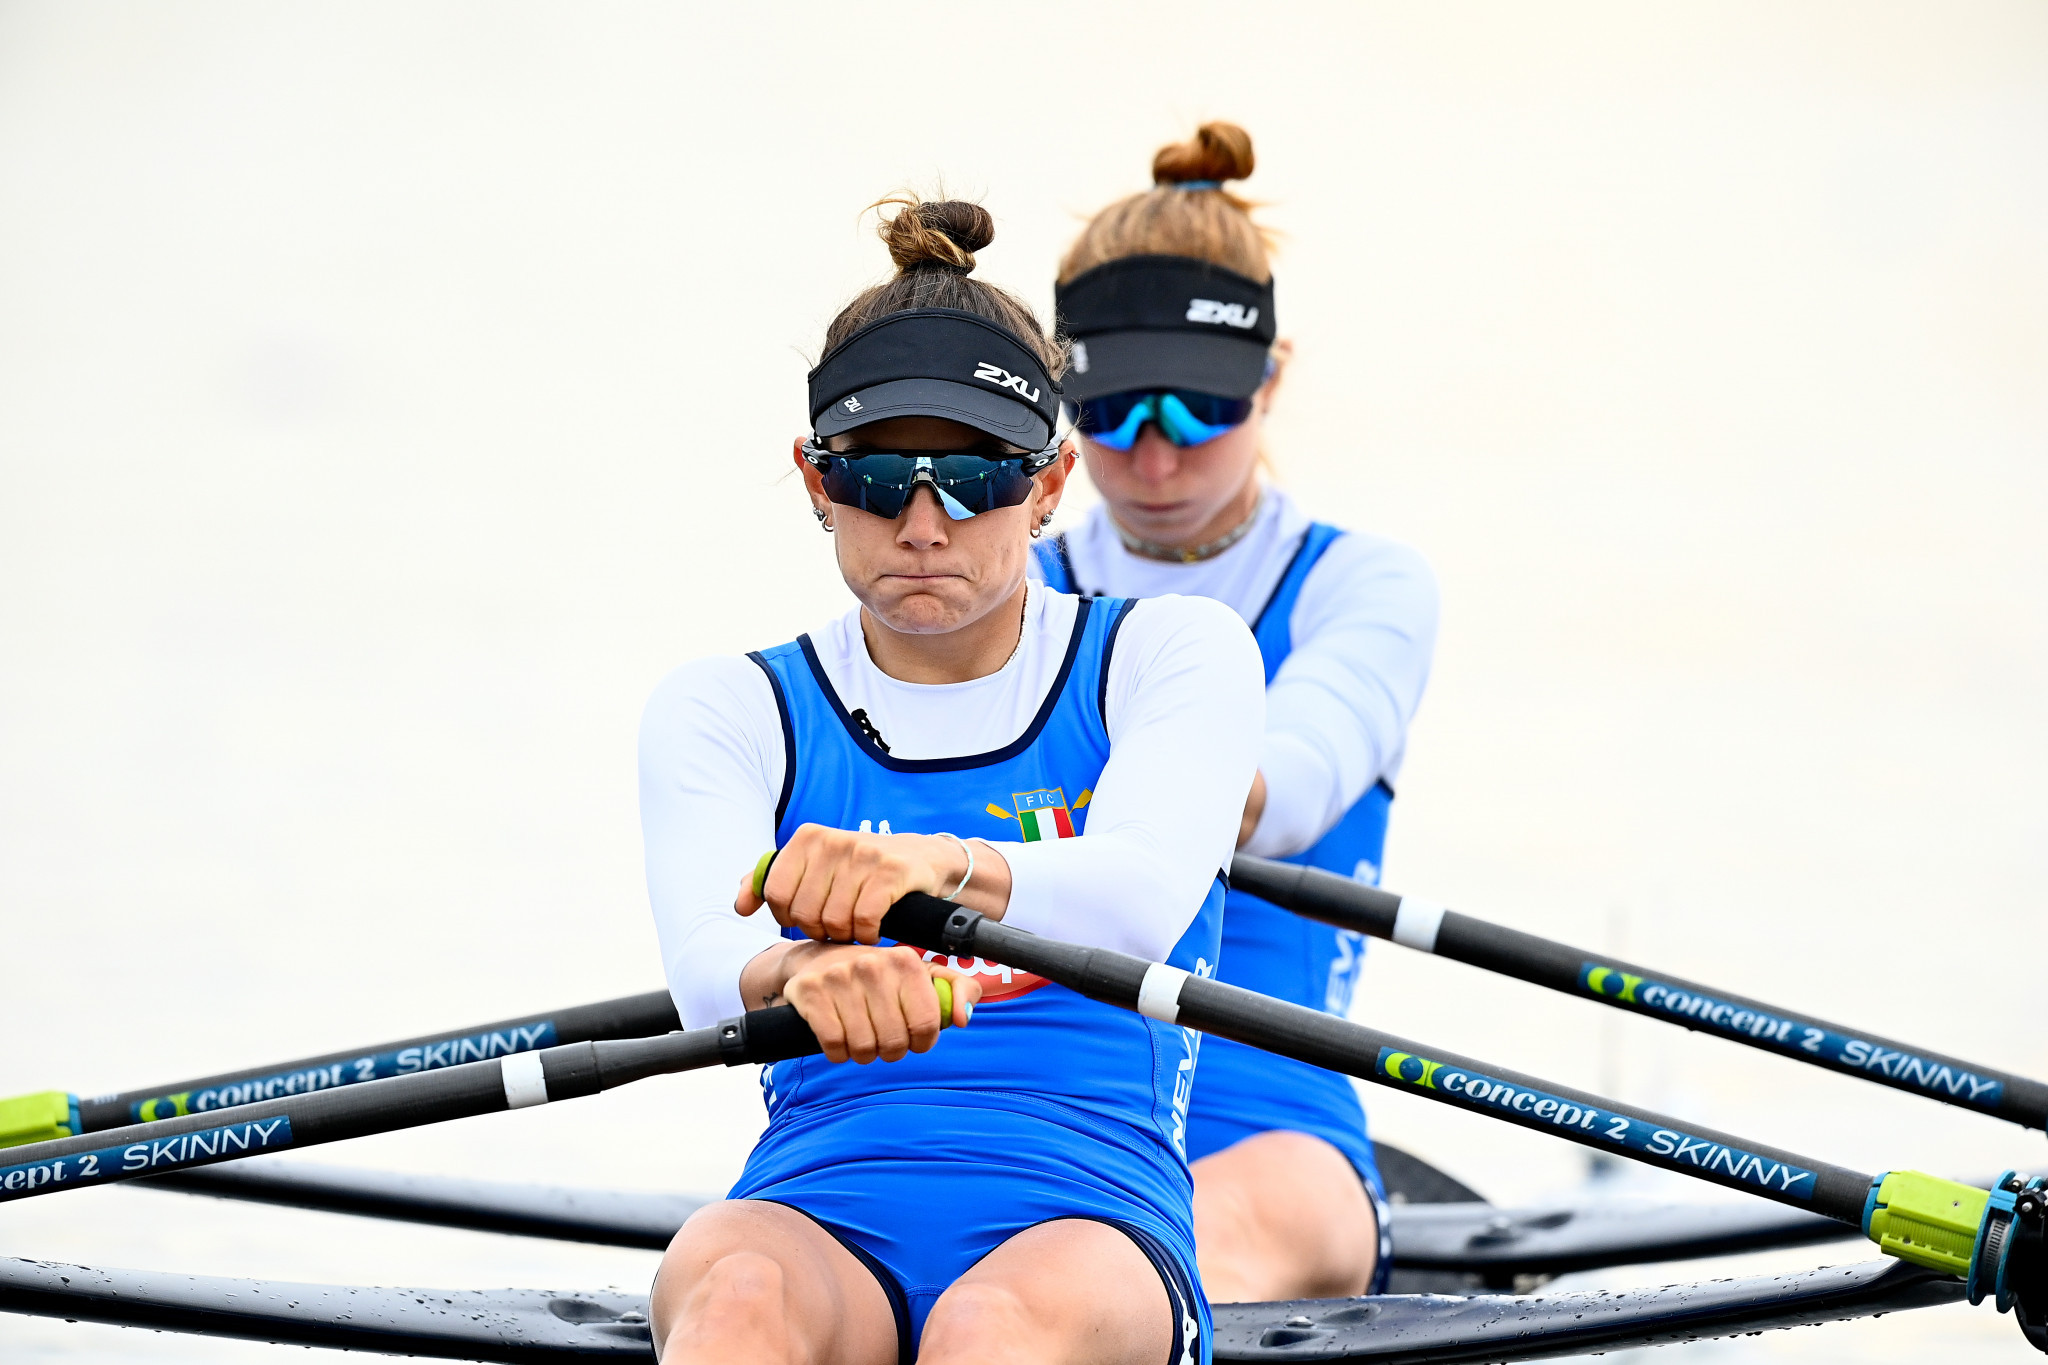 Italy's Valentina Rodini and Federica Cesarini could only place fourth in their lightweight women's double scull semi-final ©Getty Images